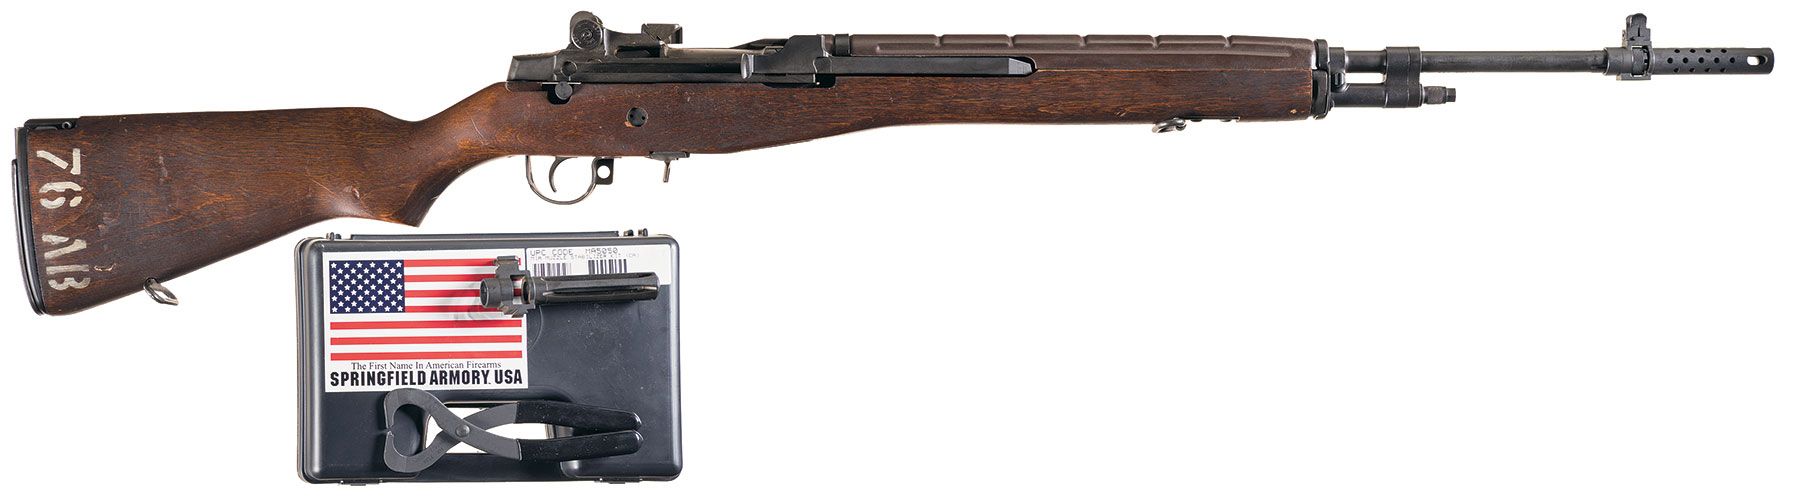 springfield armory m1a date by serial number